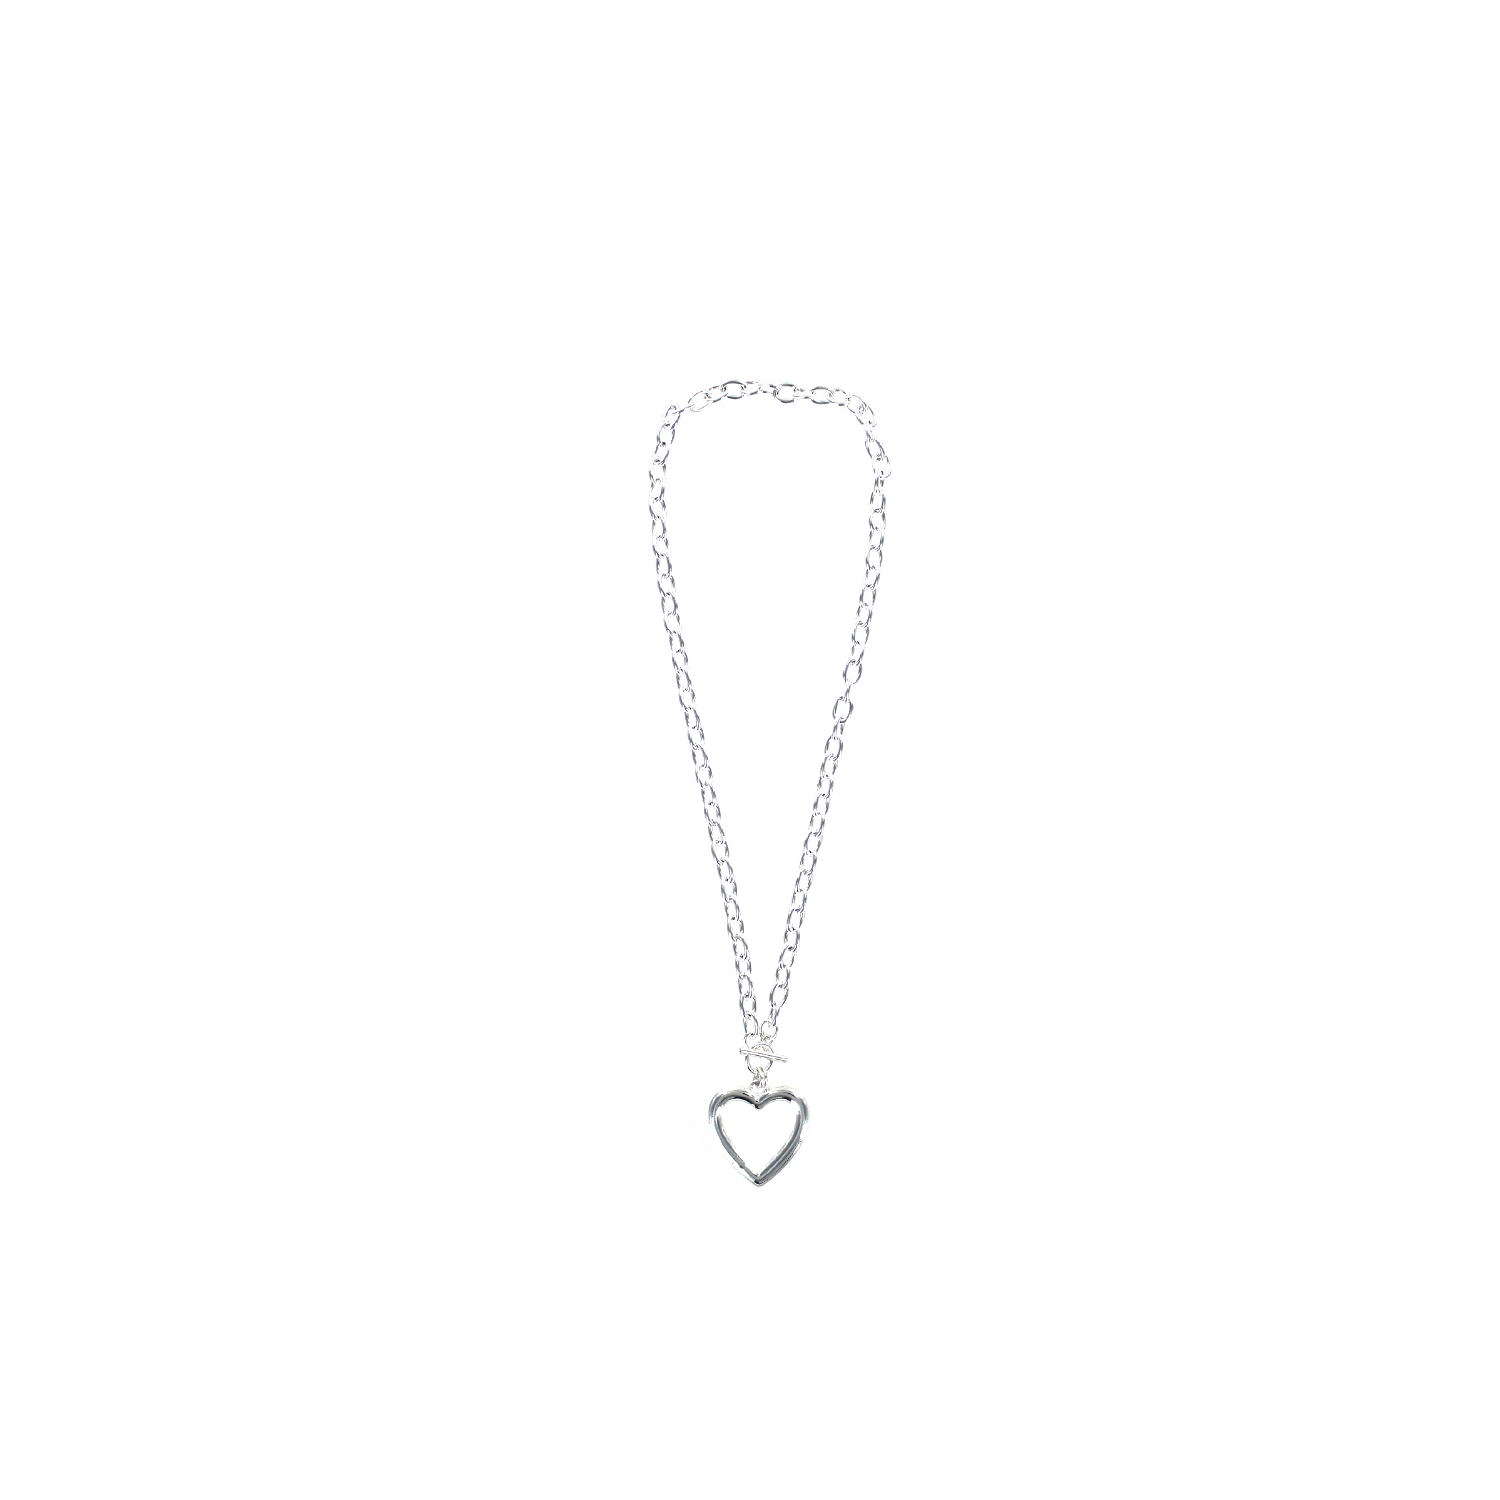 Silver tone link heart detail necklace.